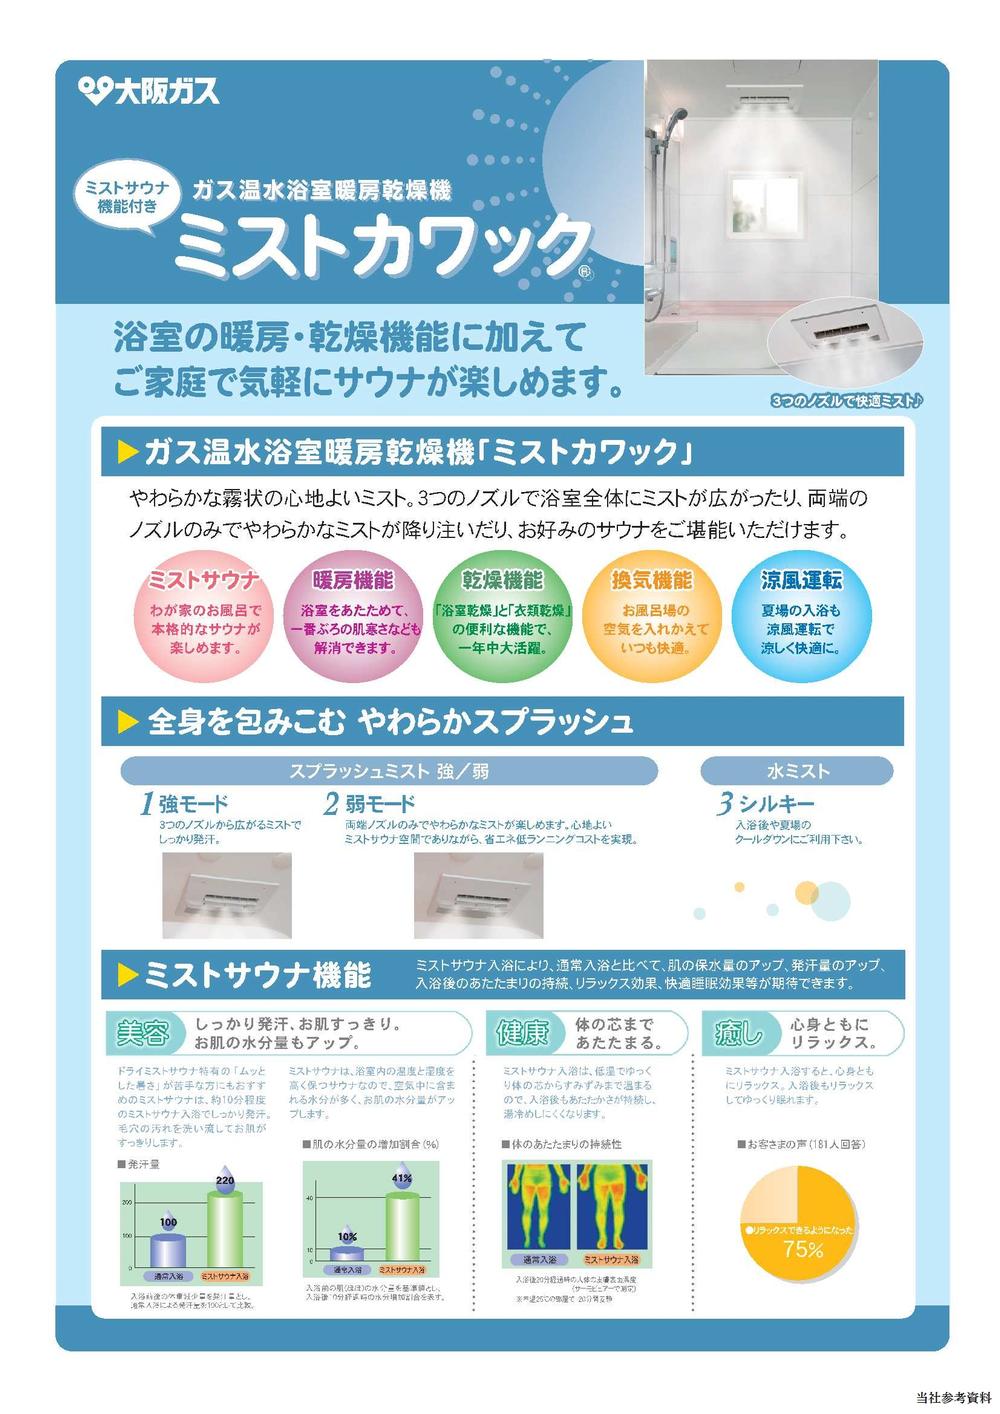 Other Equipment. Gas bathroom heating dryer: quite dry out no laundry at the time of Kawakku rainy season Ya, I'm glad to winter of cold the bathroom! 